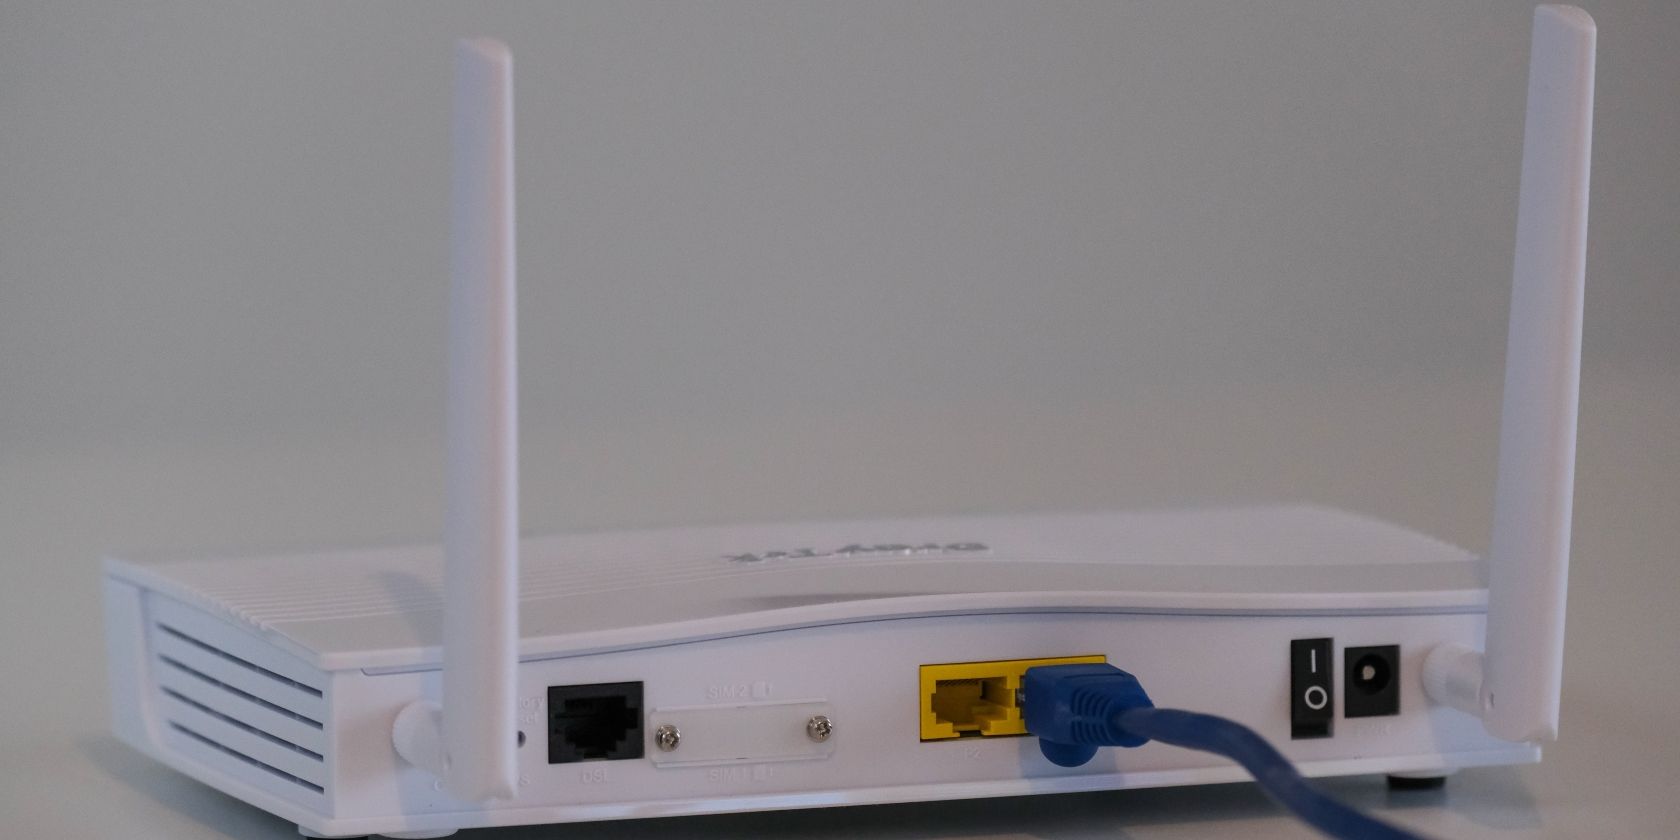 Internet router with cable on a white surface